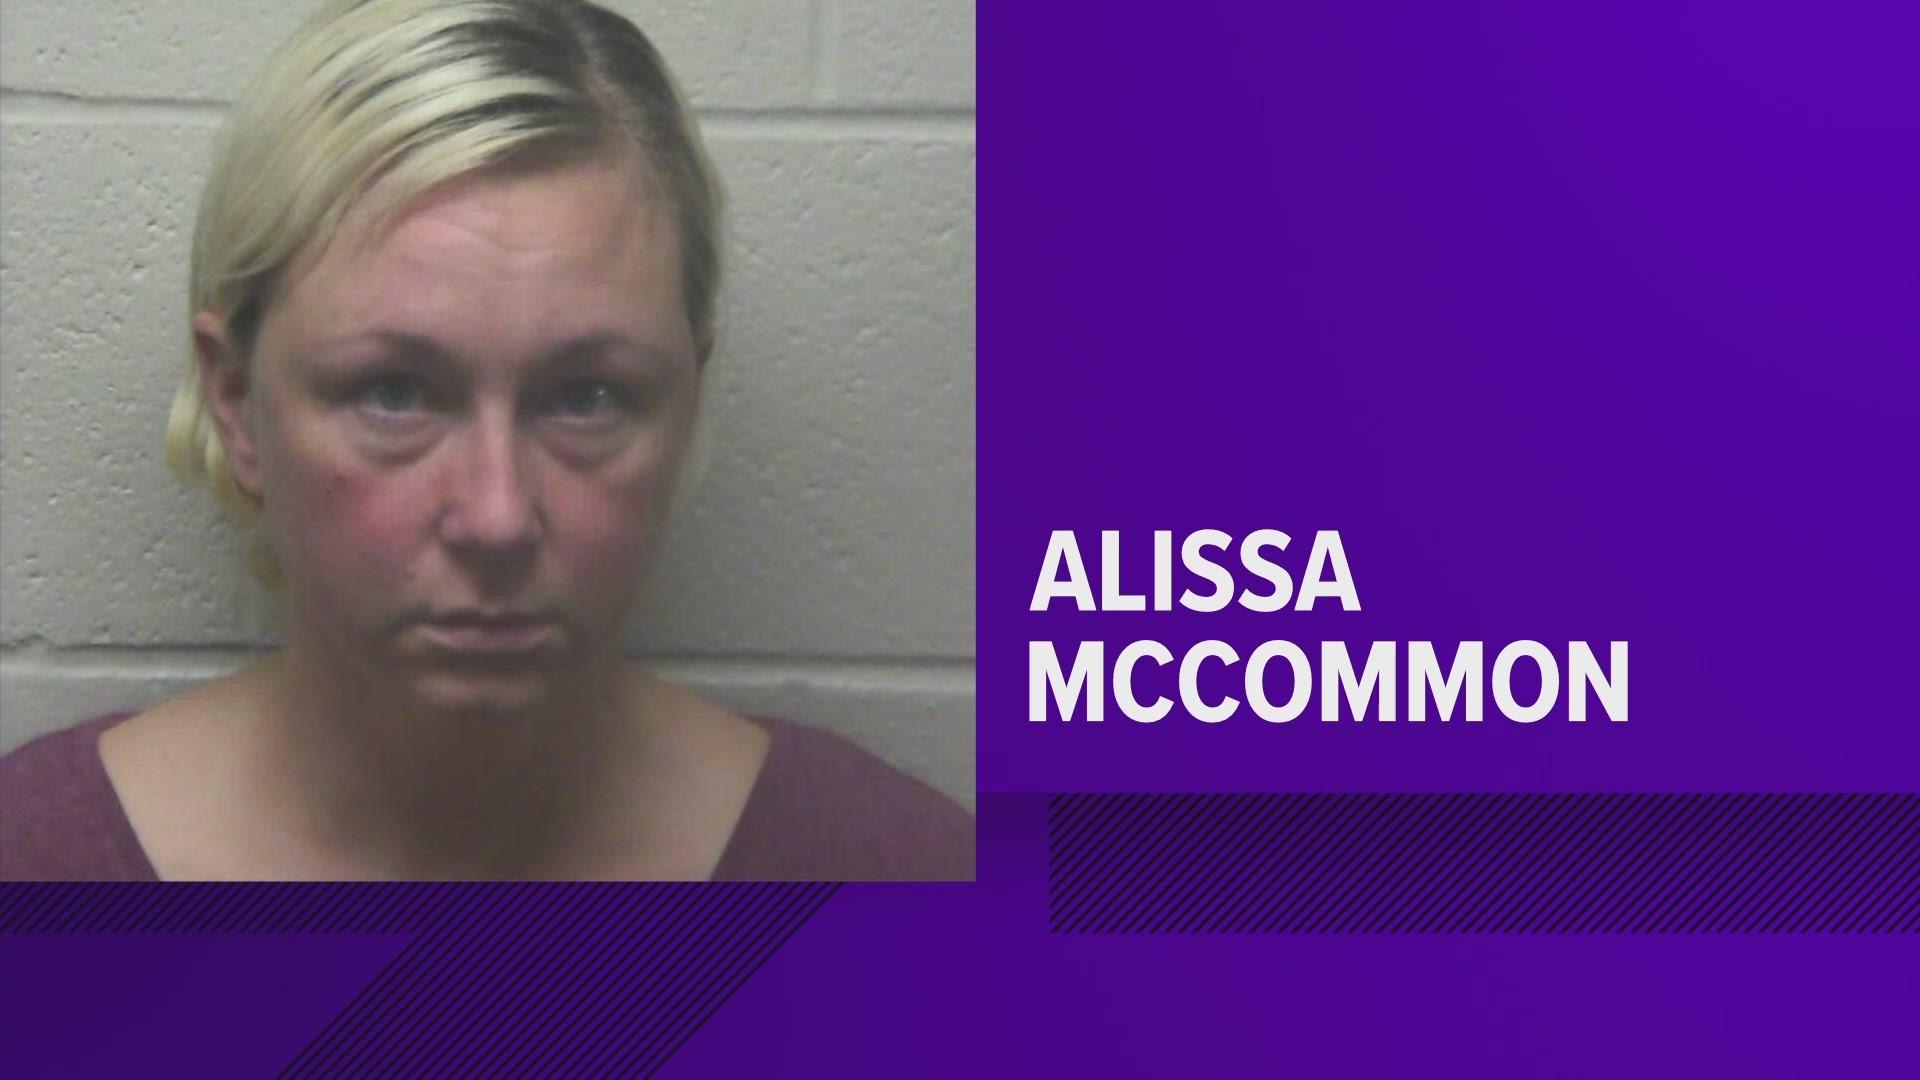 The Tipton County Sheriff's Office confirmed the arrest Friday, and court records show Alissa McCommon was charged with rape of a child.